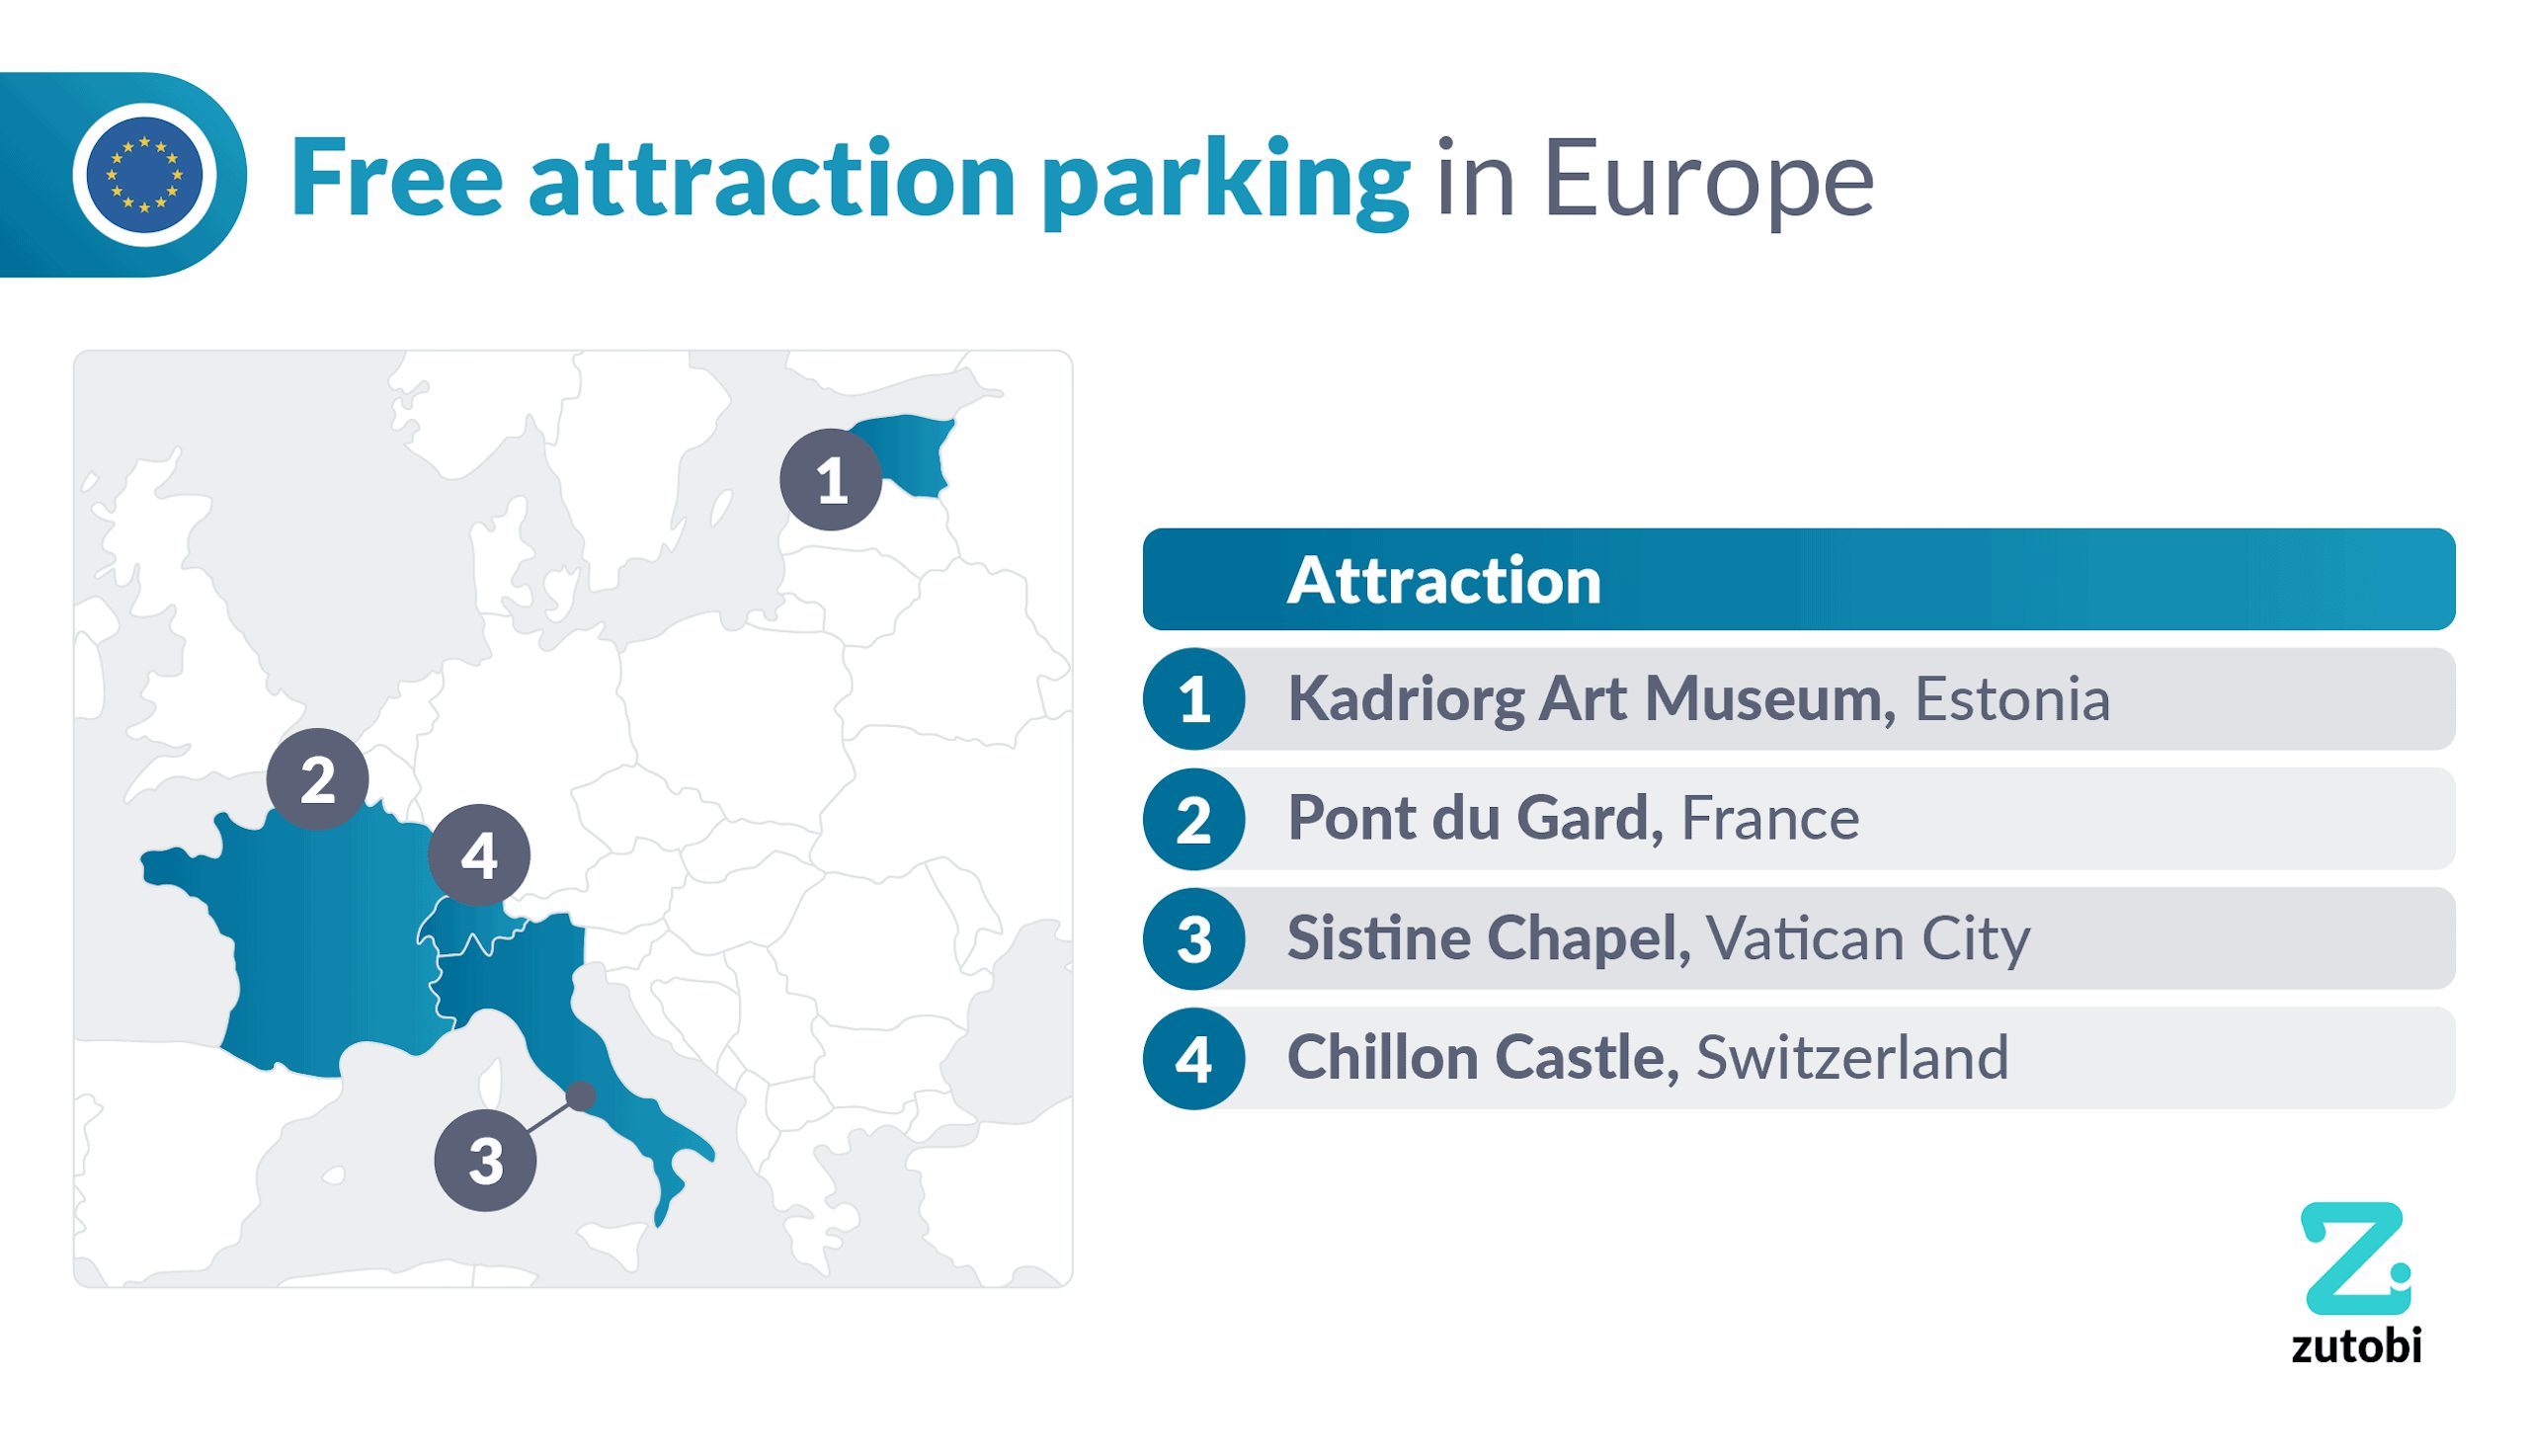 Attractions with free parking in Europe